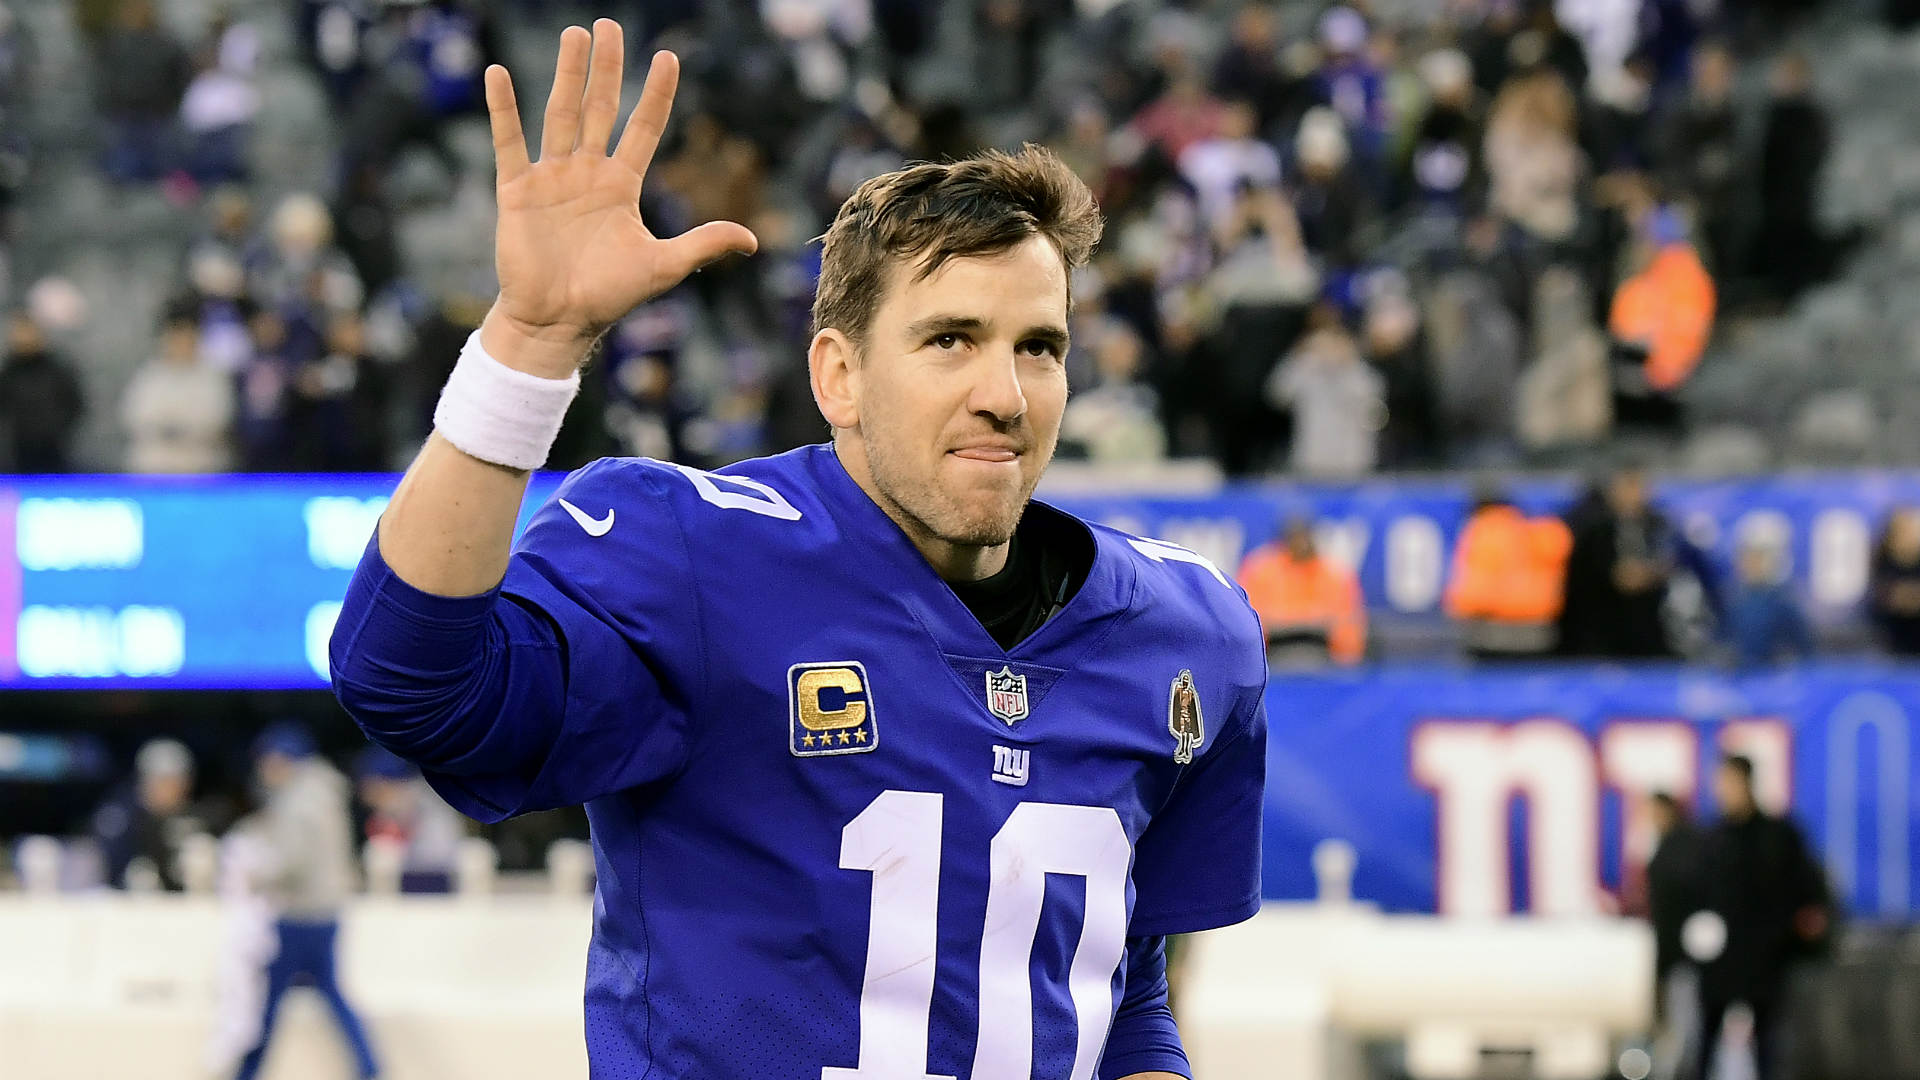 Does Eli Manning have a future with Giants? 'We’ll see,' he says | Sporting News1920 x 1080